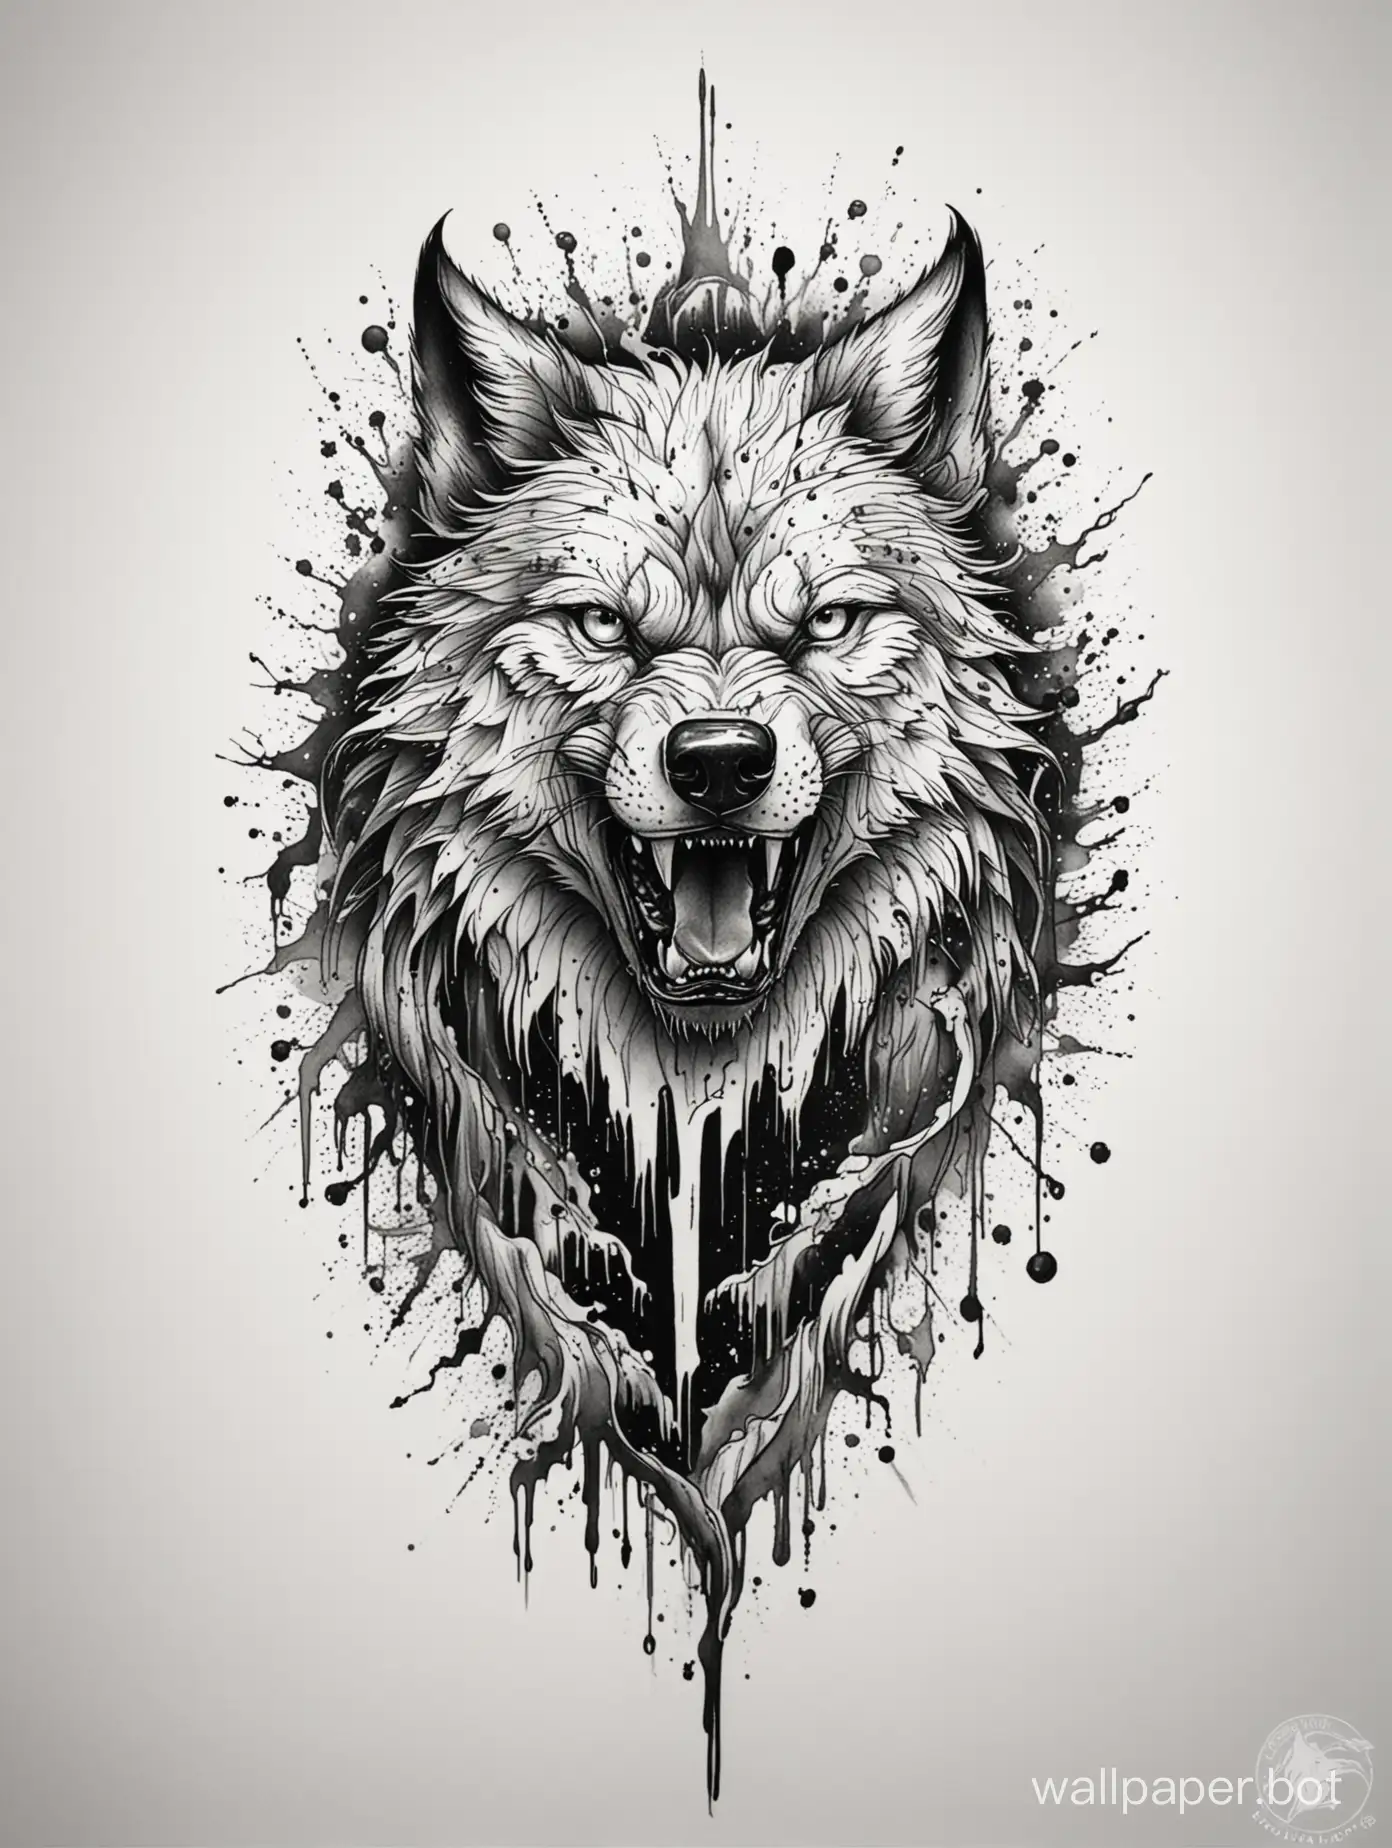 Furious wolf, lineart tattoo, explosive chaos blackwork, darkness organic lines, white background, fluid dripping ink